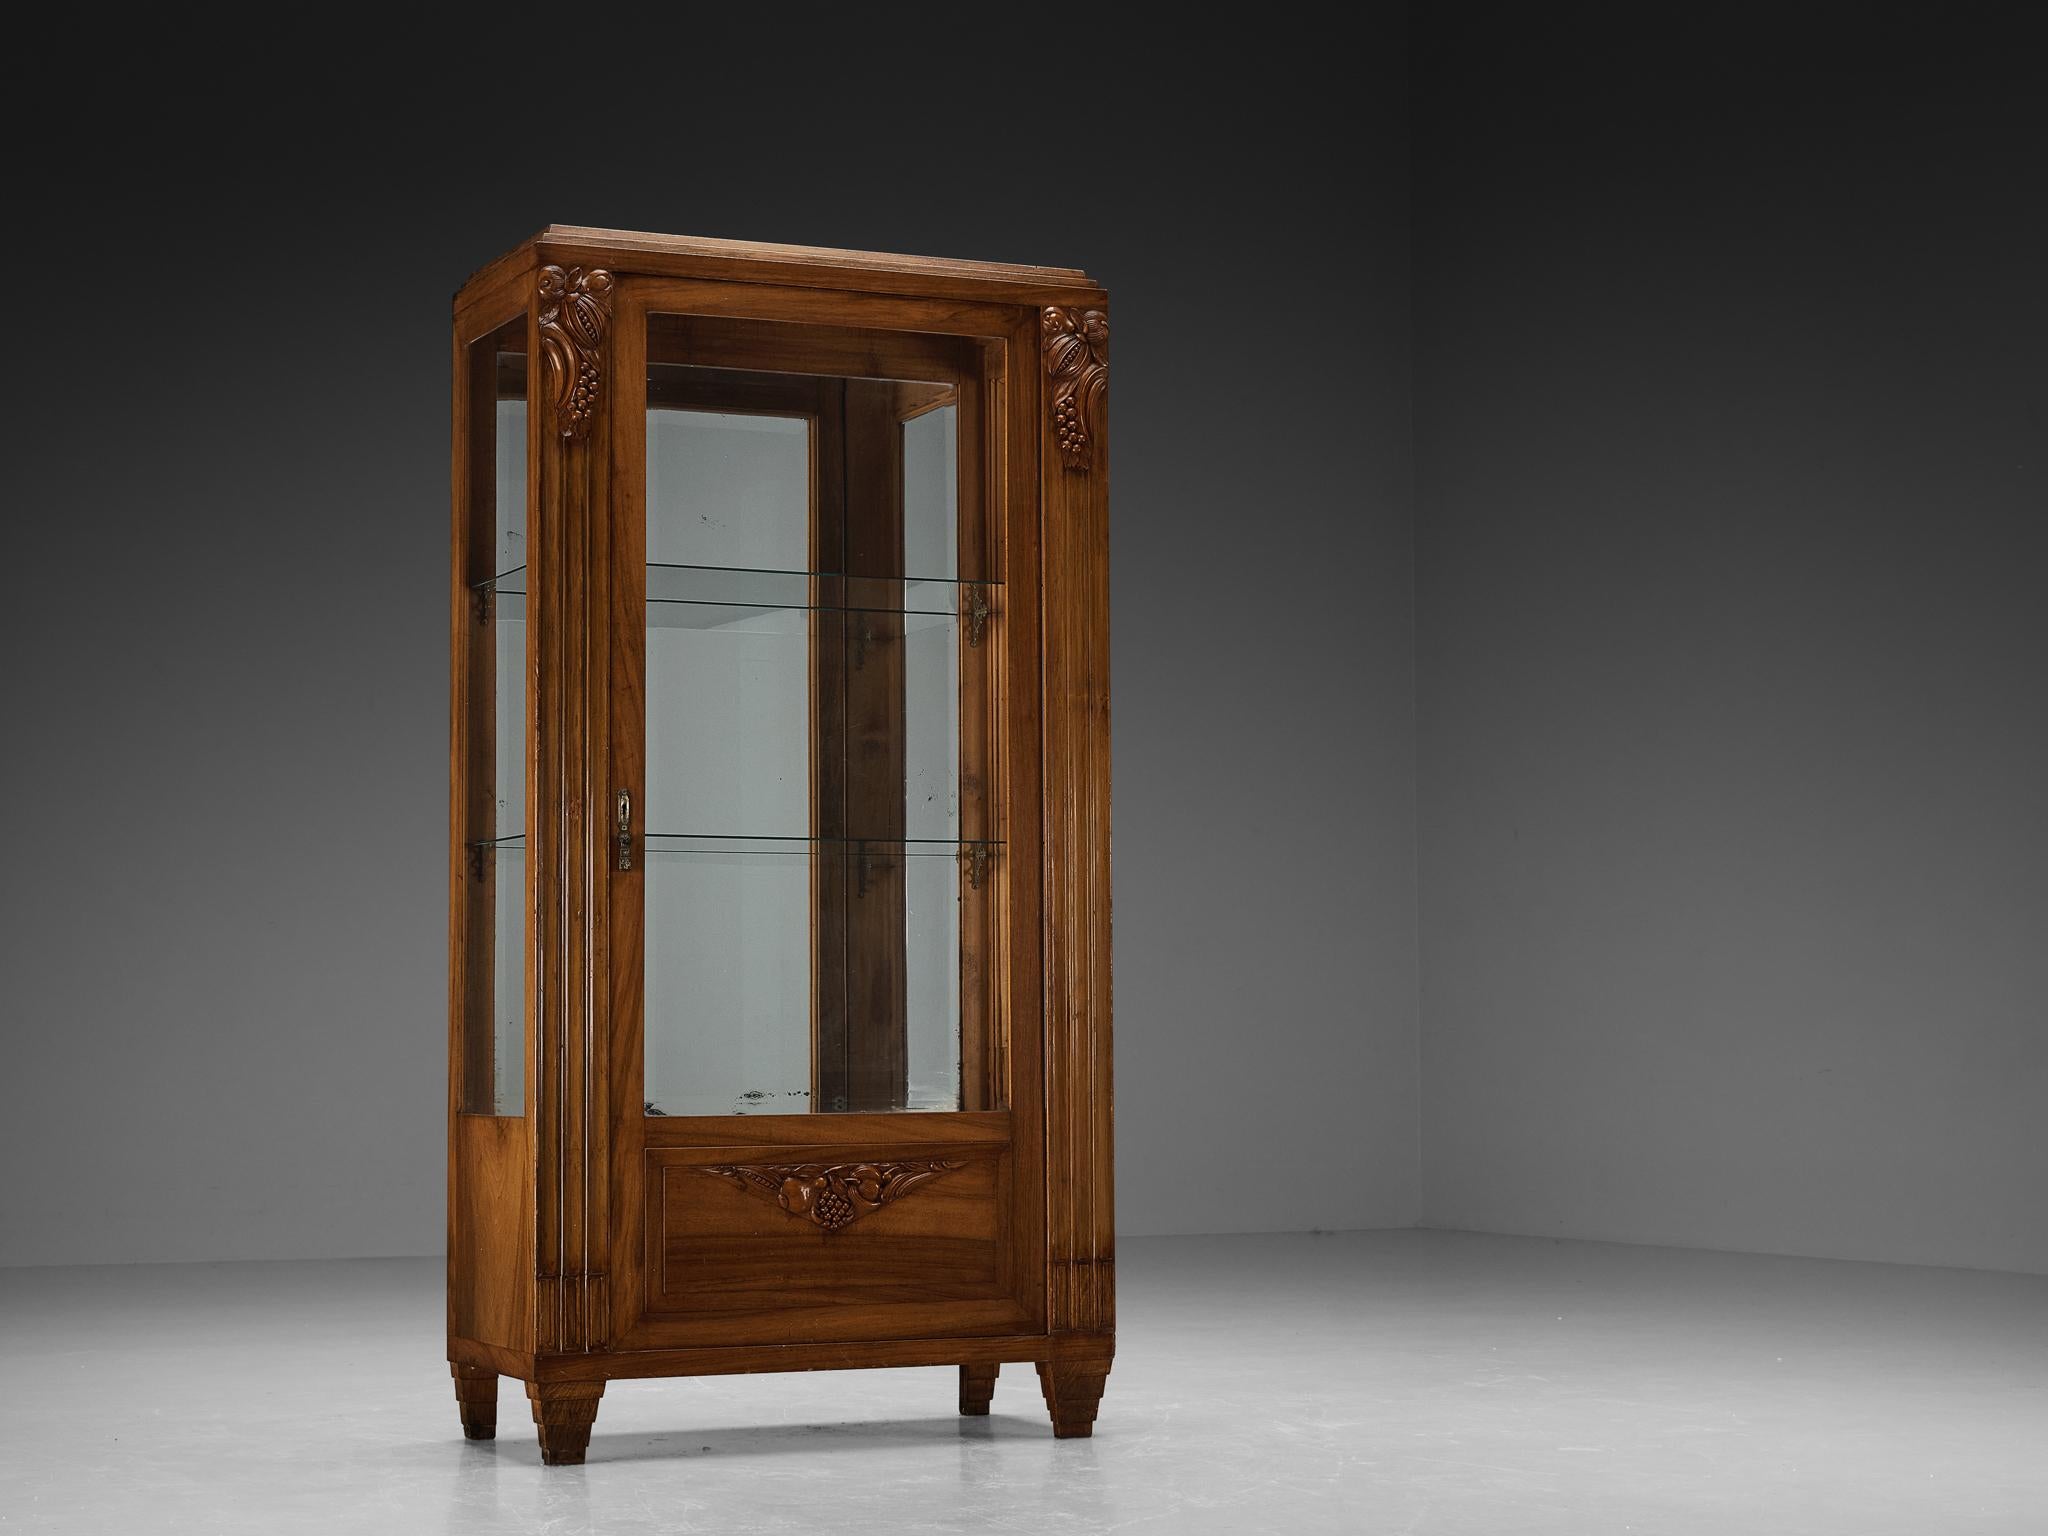 Vitrine, walnut, mirrored glass, glass, brass, Europe, 1940s.

This wonderful Art Deco showcase is made in Europe in the 1940s and is executed in partially carved walnut wood. This showcase displays exquisite detailing in the shape of decorative